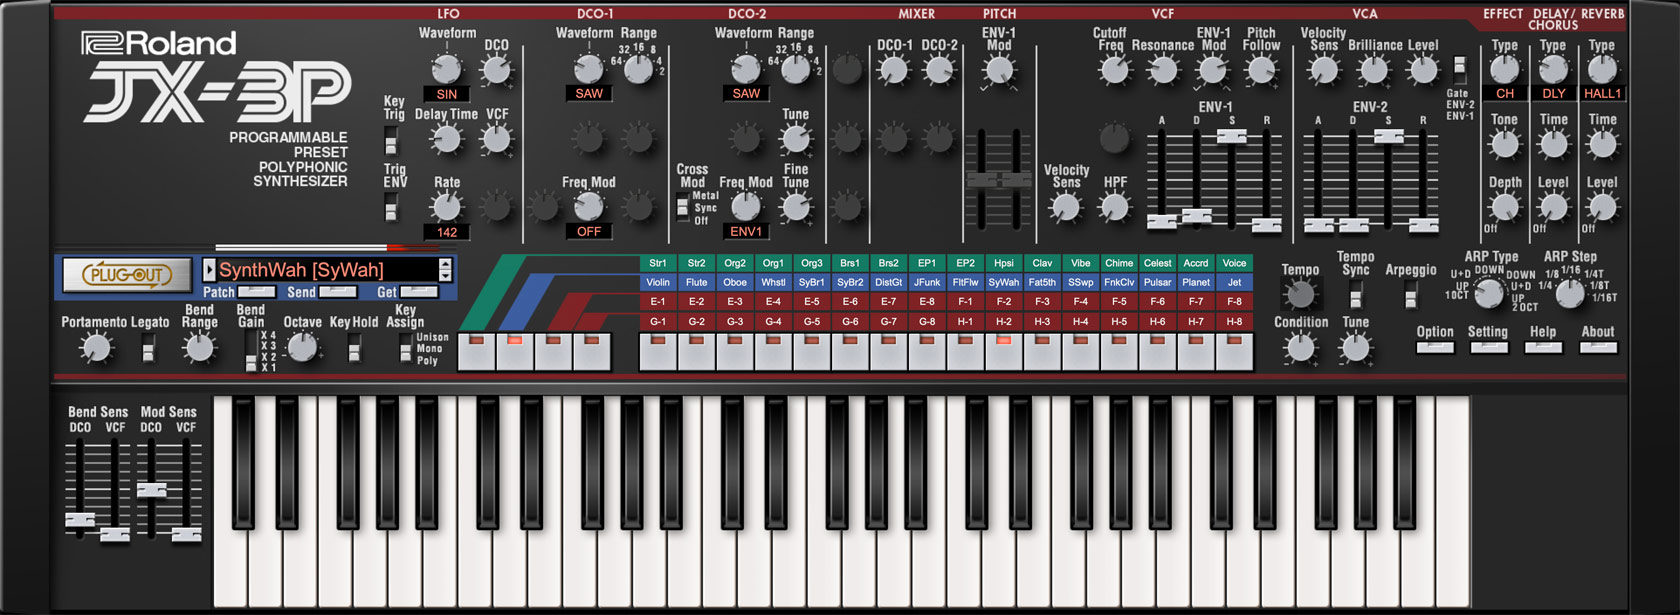 Roland - JX-3P | Software Synthesizer